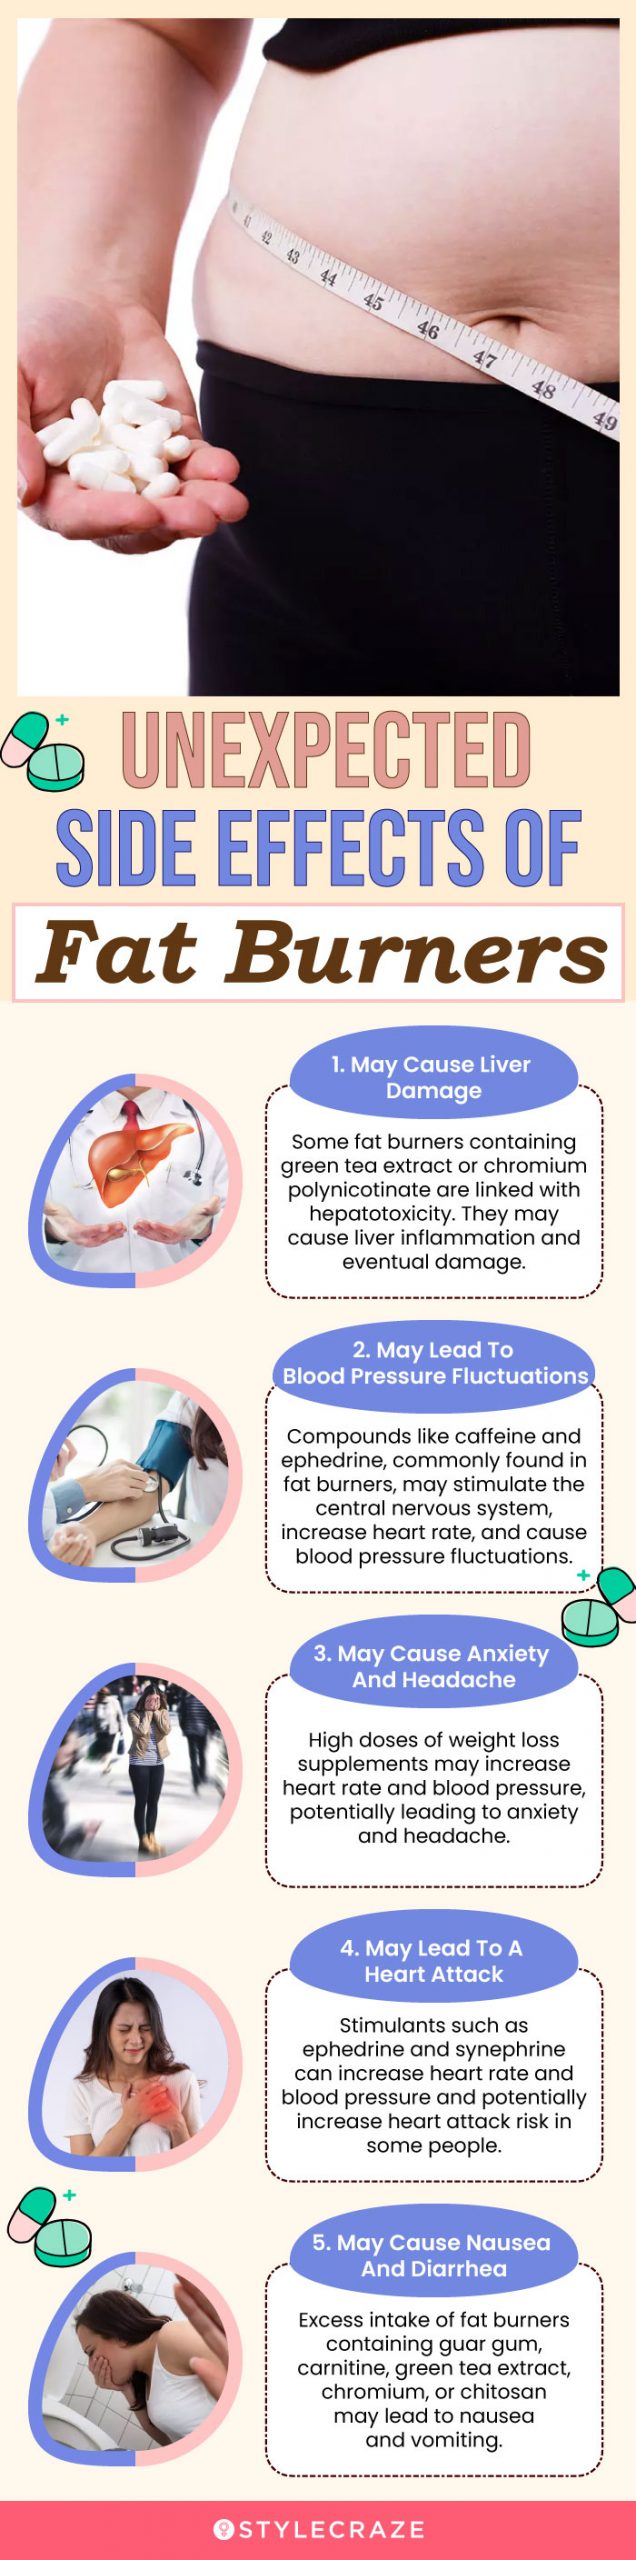 unexpected side effects of fat burners (infographic)